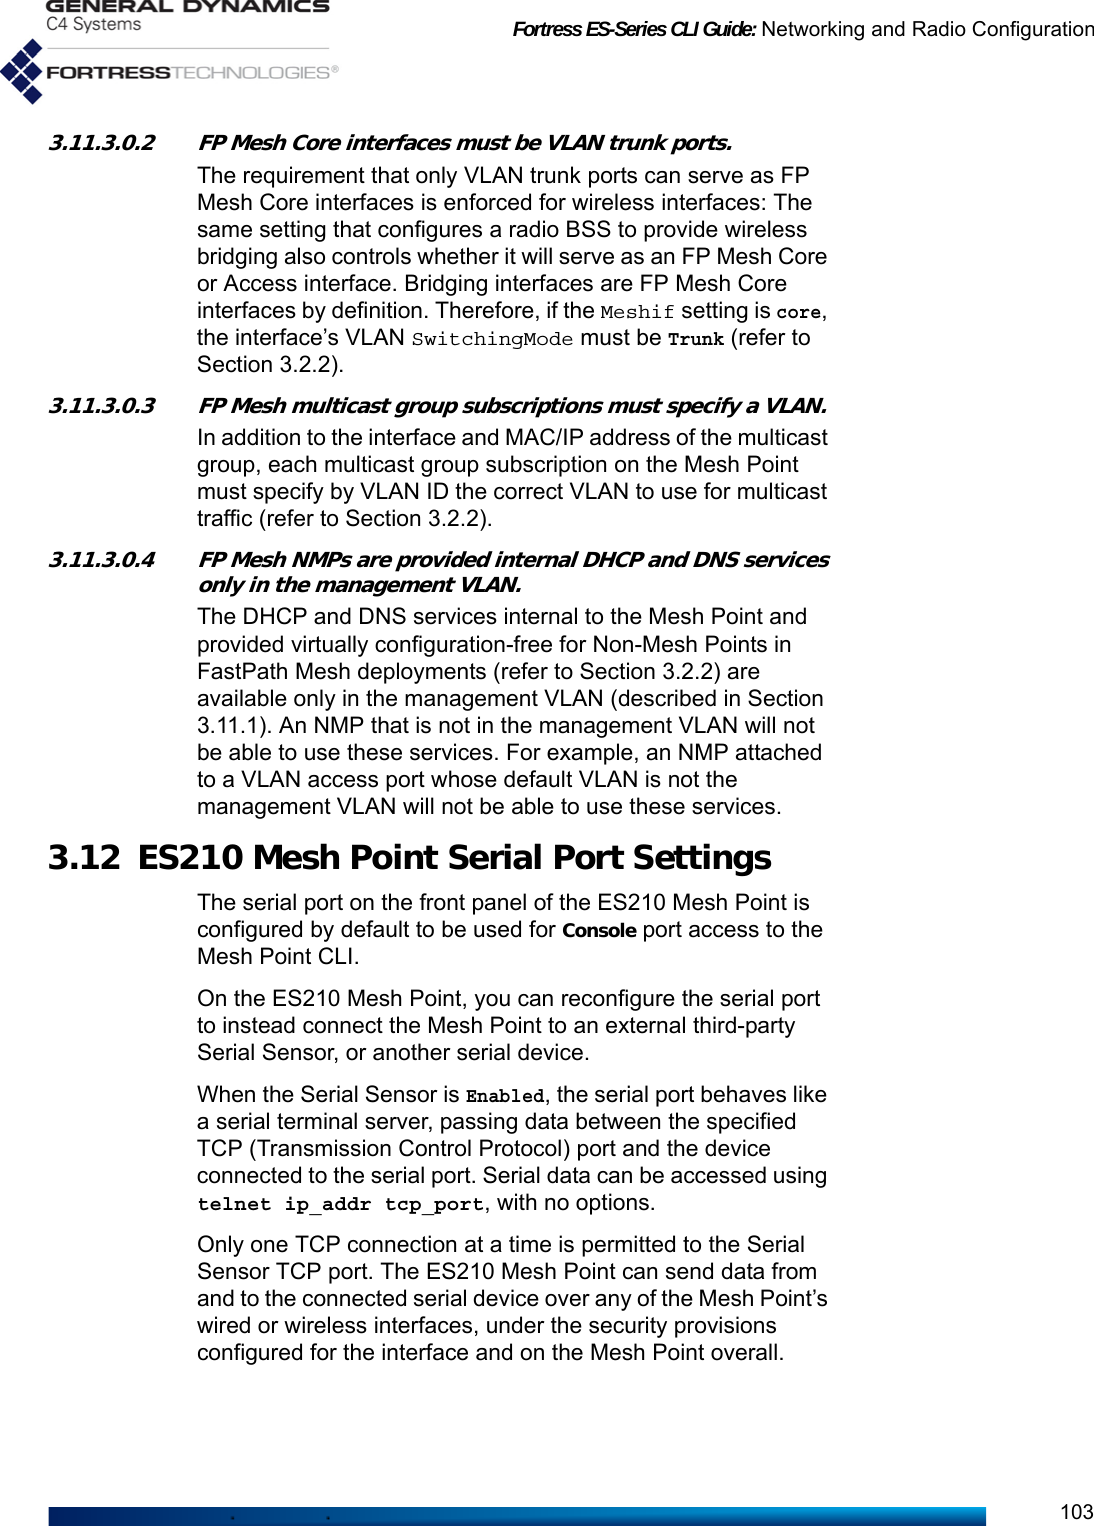 Fortress ES-Series CLI Guide: Networking and Radio Configuration1033.11.3.0.2 FP Mesh Core interfaces must be VLAN trunk ports.The requirement that only VLAN trunk ports can serve as FP Mesh Core interfaces is enforced for wireless interfaces: The same setting that configures a radio BSS to provide wireless bridging also controls whether it will serve as an FP Mesh Core or Access interface. Bridging interfaces are FP Mesh Core interfaces by definition. Therefore, if the Meshif setting is core, the interface’s VLAN SwitchingMode must be Trunk (refer to Section 3.2.2).3.11.3.0.3 FP Mesh multicast group subscriptions must specify a VLAN.In addition to the interface and MAC/IP address of the multicast group, each multicast group subscription on the Mesh Point must specify by VLAN ID the correct VLAN to use for multicast traffic (refer to Section 3.2.2).3.11.3.0.4 FP Mesh NMPs are provided internal DHCP and DNS services only in the management VLAN.The DHCP and DNS services internal to the Mesh Point and provided virtually configuration-free for Non-Mesh Points in FastPath Mesh deployments (refer to Section 3.2.2) are available only in the management VLAN (described in Section 3.11.1). An NMP that is not in the management VLAN will not be able to use these services. For example, an NMP attached to a VLAN access port whose default VLAN is not the management VLAN will not be able to use these services.3.12 ES210 Mesh Point Serial Port SettingsThe serial port on the front panel of the ES210 Mesh Point is configured by default to be used for Console port access to the Mesh Point CLI.On the ES210 Mesh Point, you can reconfigure the serial port to instead connect the Mesh Point to an external third-party Serial Sensor, or another serial device.When the Serial Sensor is Enabled, the serial port behaves like a serial terminal server, passing data between the specified TCP (Transmission Control Protocol) port and the device connected to the serial port. Serial data can be accessed using telnet ip_addr tcp_port, with no options.Only one TCP connection at a time is permitted to the Serial Sensor TCP port. The ES210 Mesh Point can send data from and to the connected serial device over any of the Mesh Point’s wired or wireless interfaces, under the security provisions configured for the interface and on the Mesh Point overall.